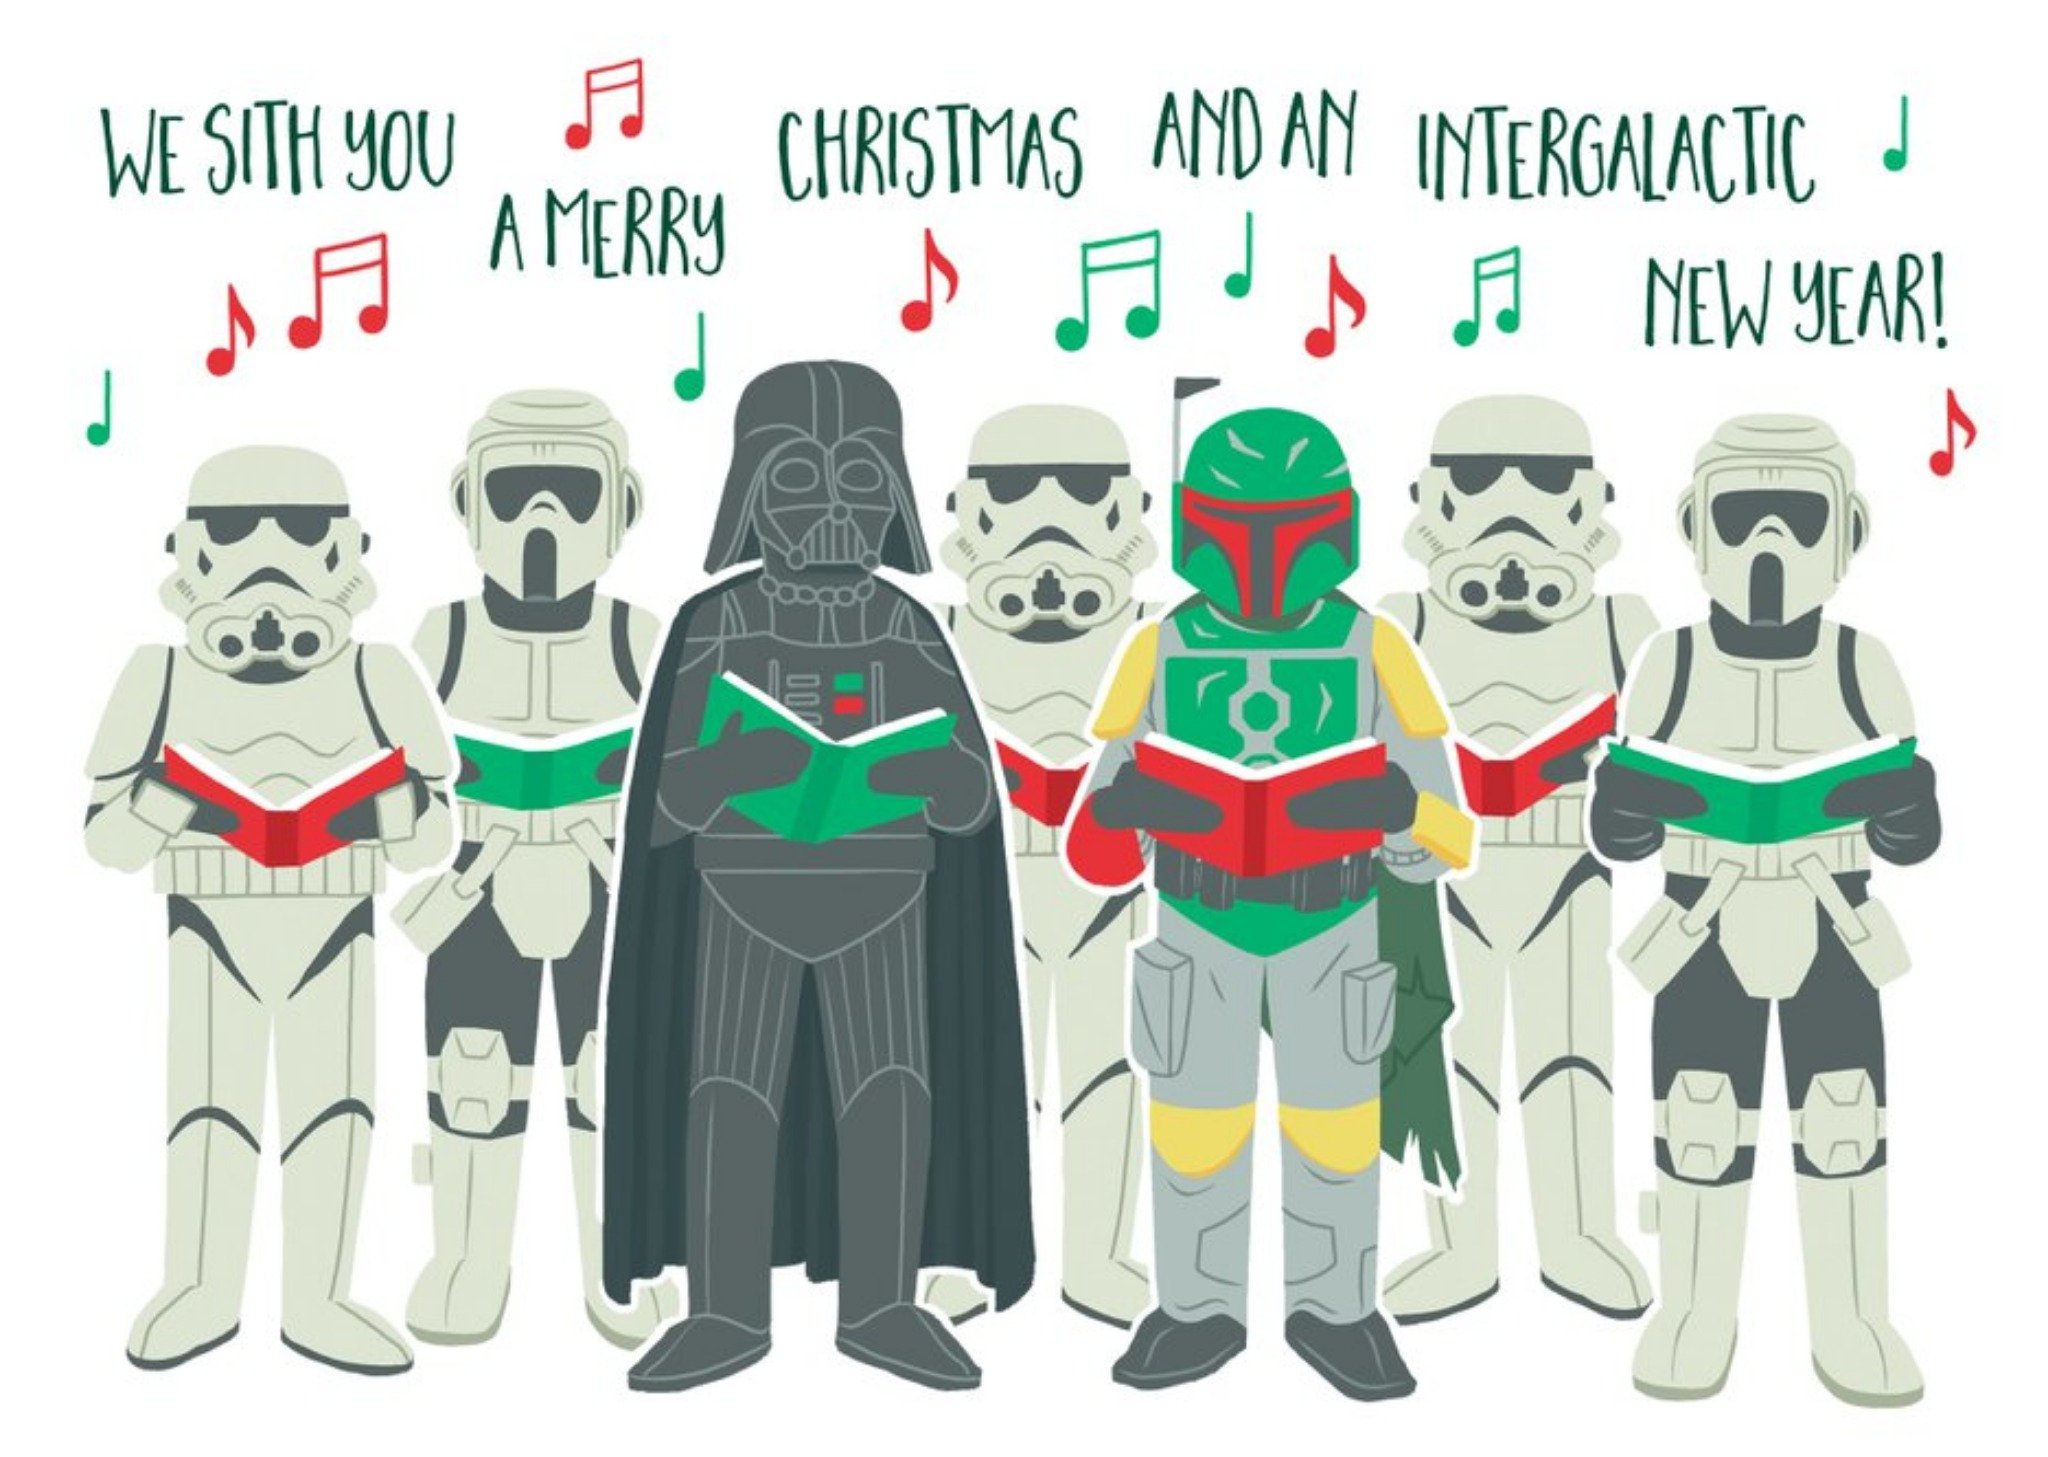 Disney Star Wars Merry Christmas And And Intergalatic New Year Card Ecard